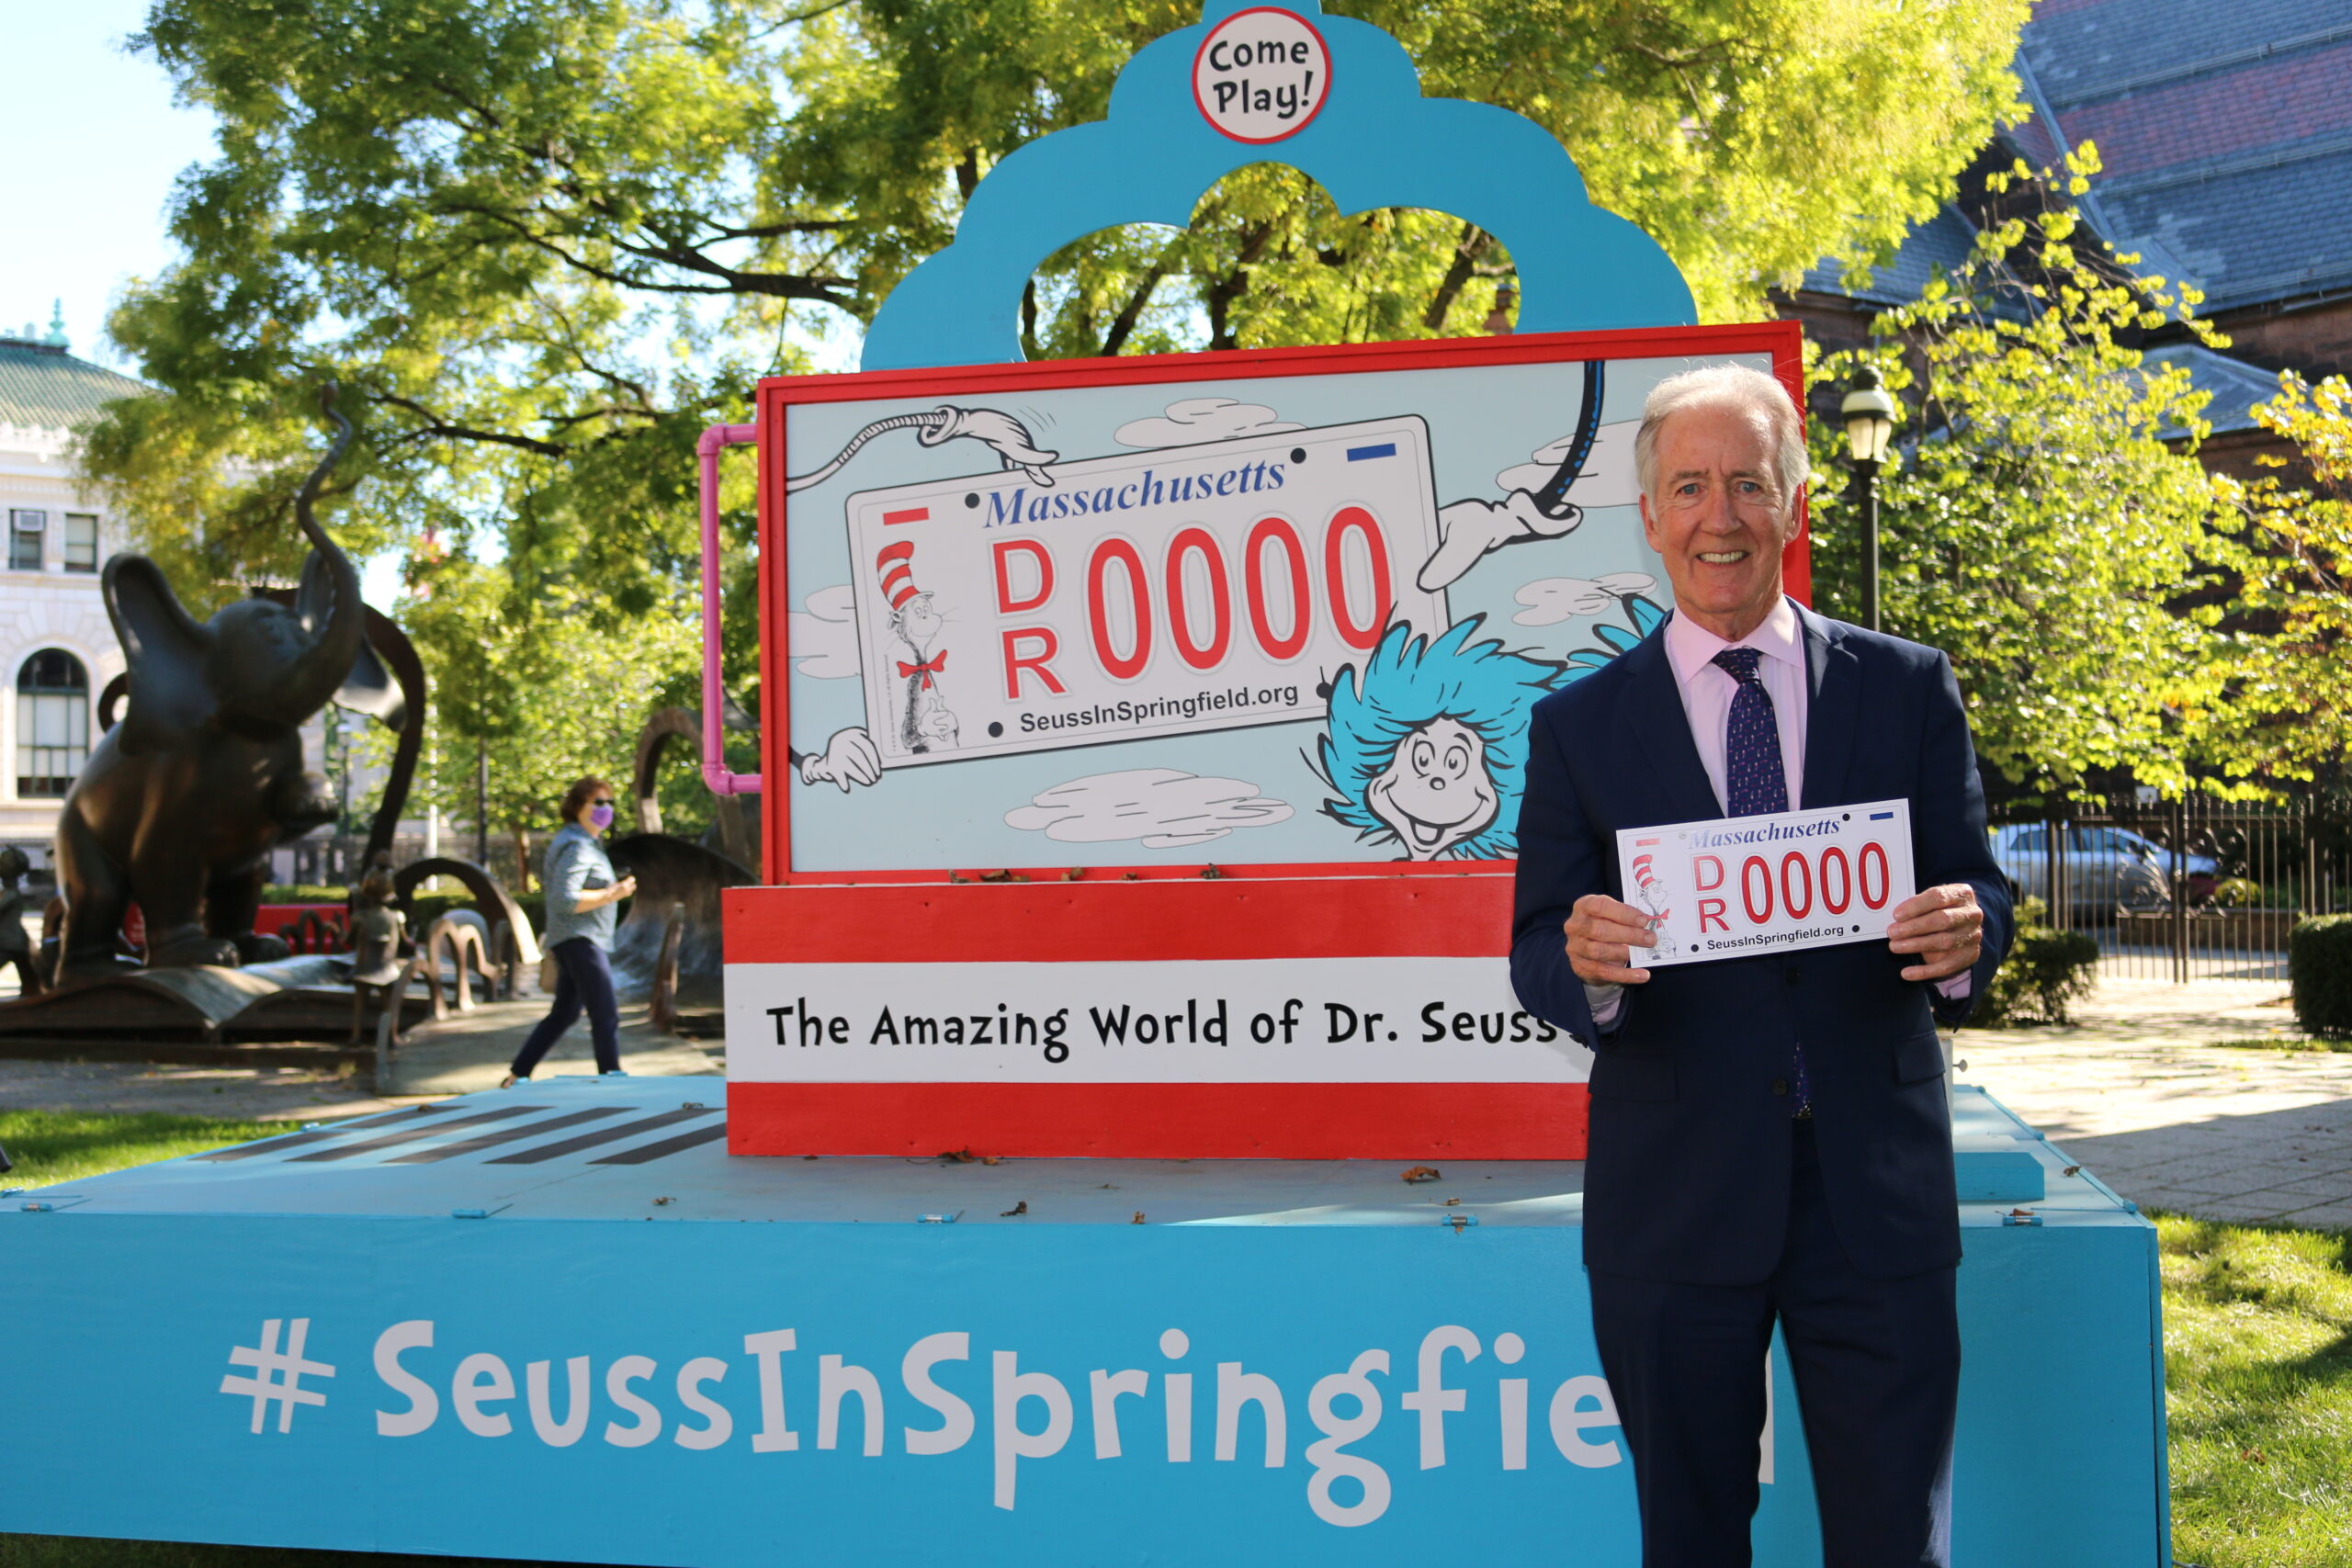 The Perfect Birthday Gift for Dr. Seuss: Reaching the Specialty License Plate Goal!